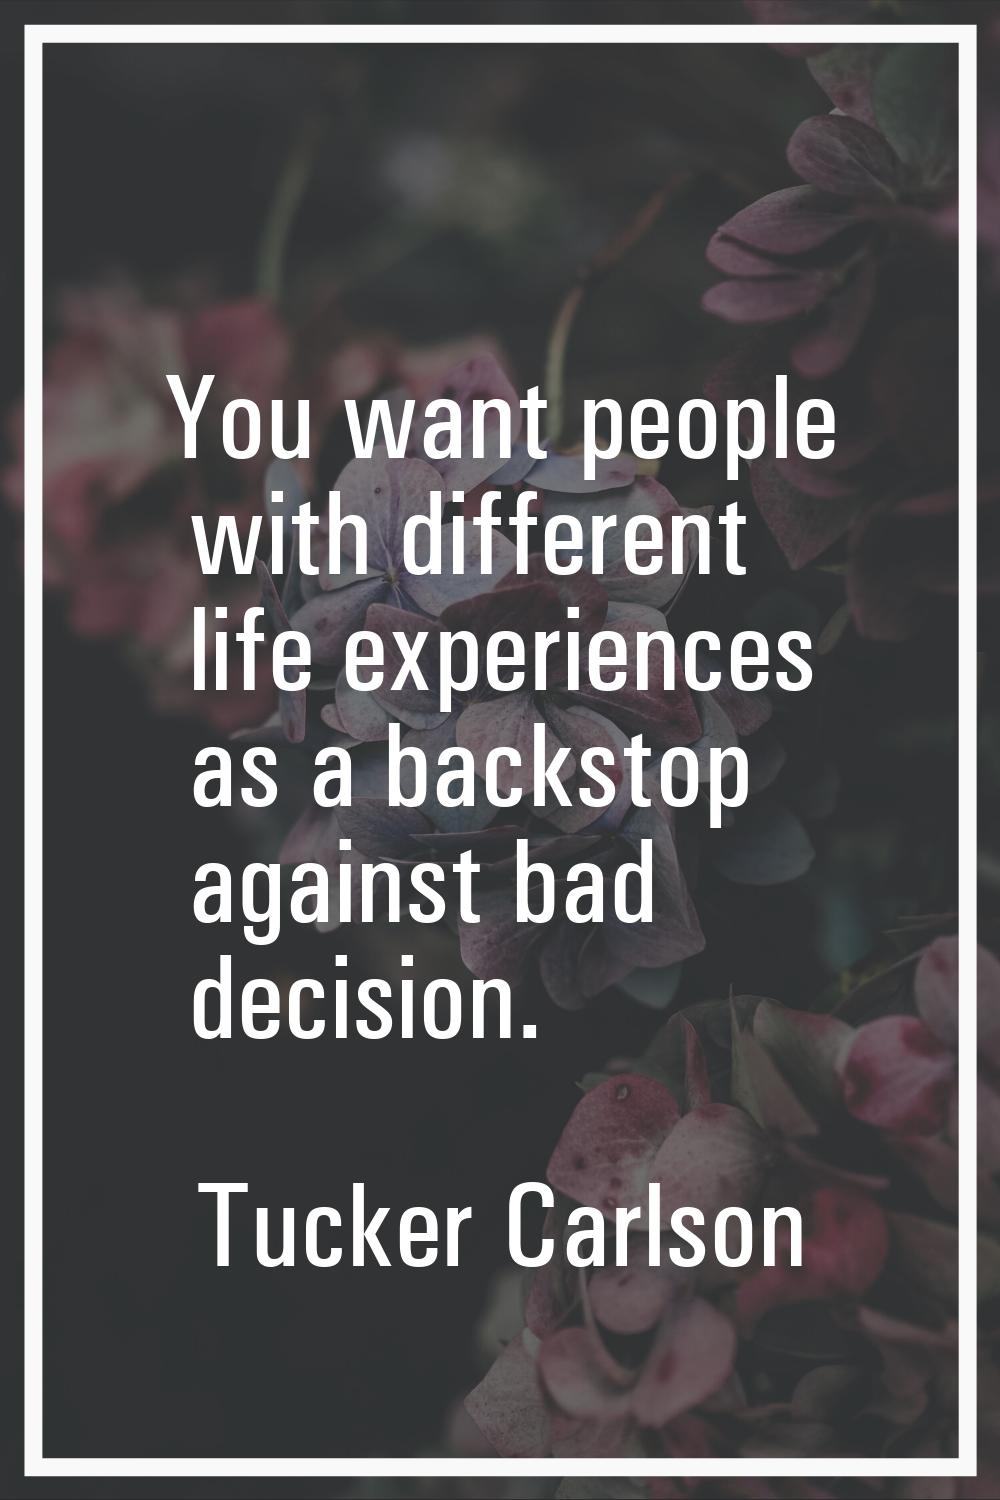 You want people with different life experiences as a backstop against bad decision.